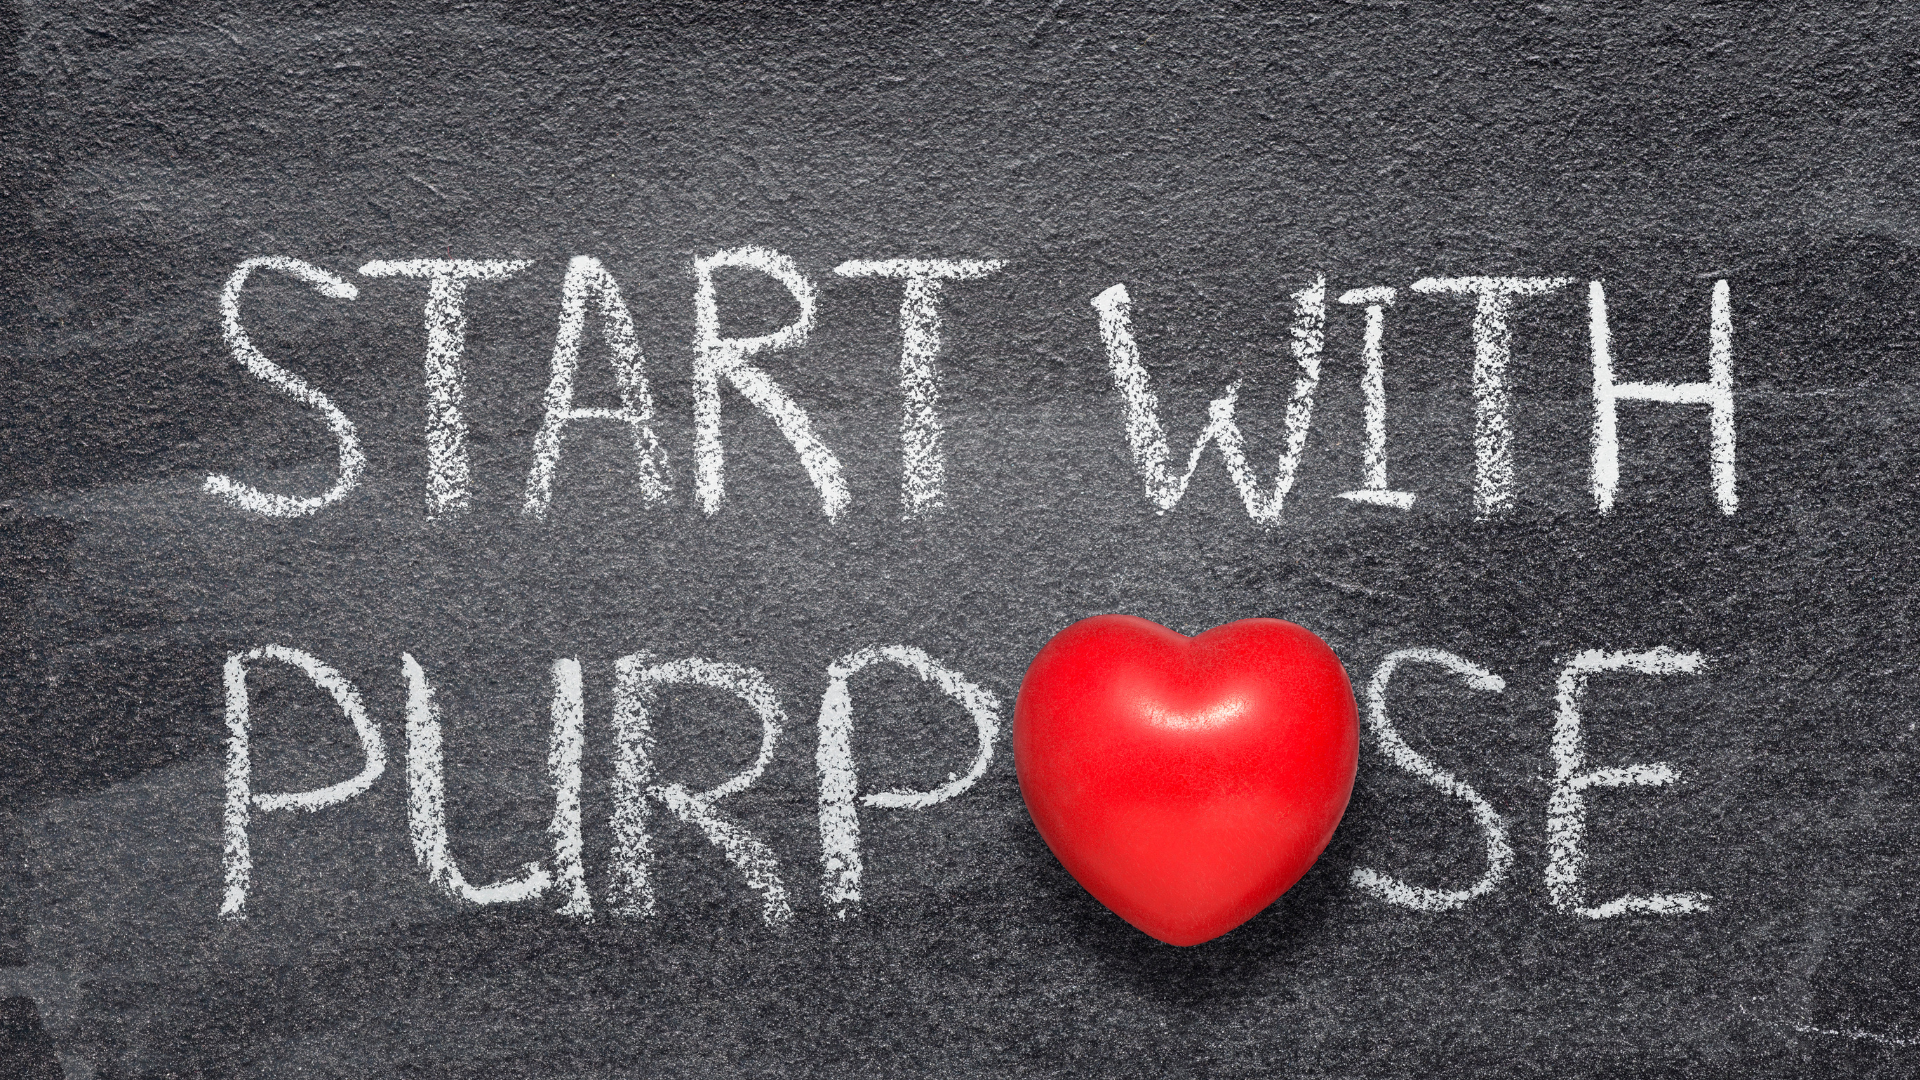 The 5 Tips for Building a Purpose-Driven Workplace